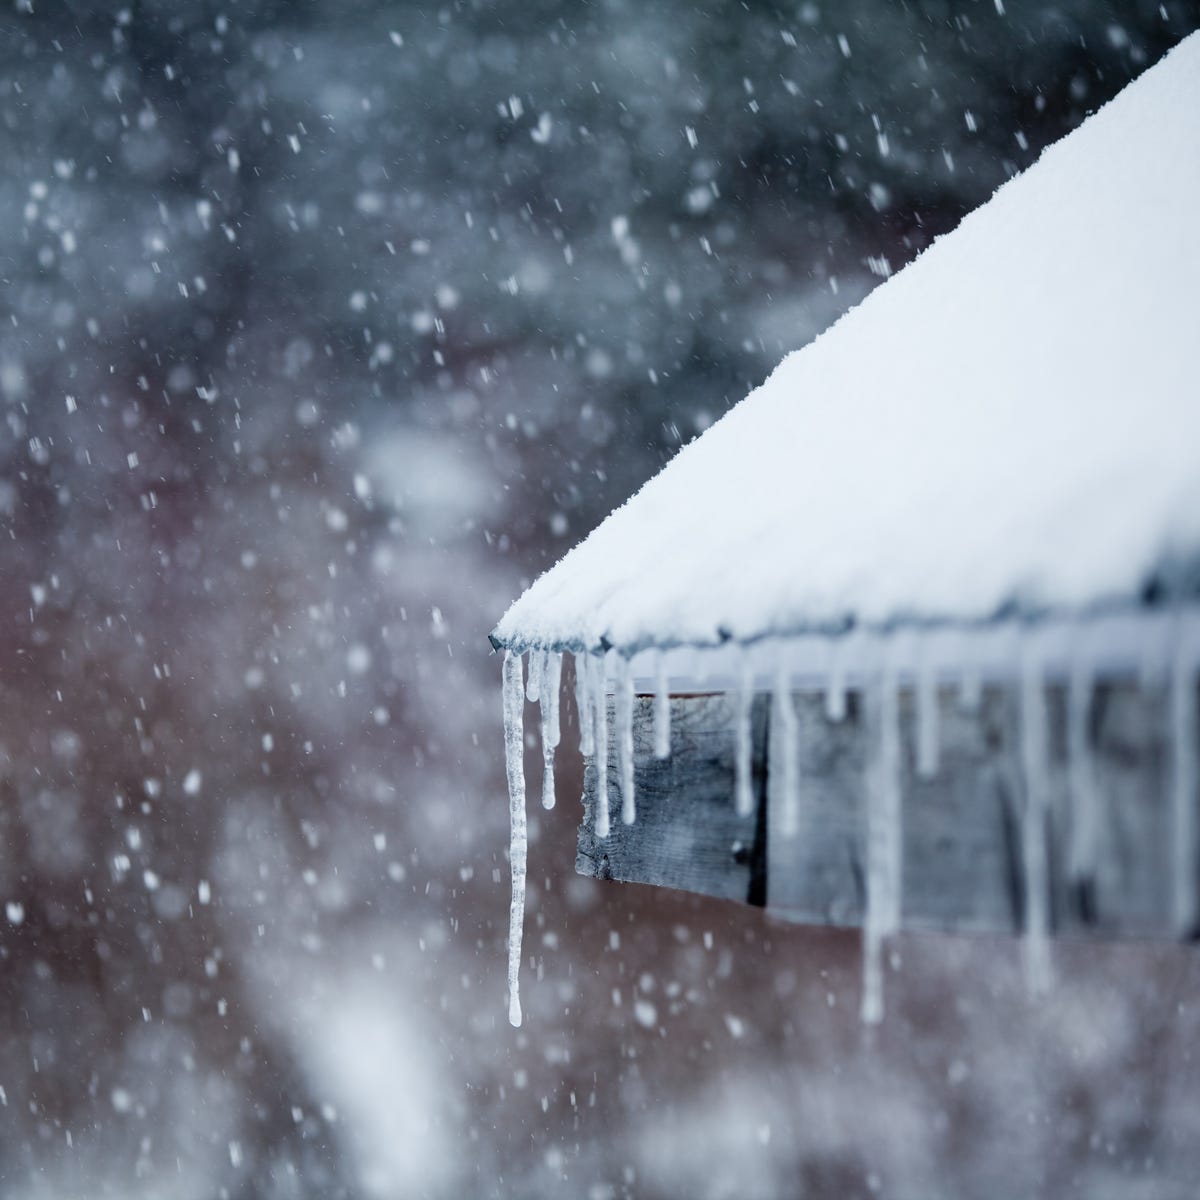 Winter Is Coming. Here's How to Prepare Your Home - CNET